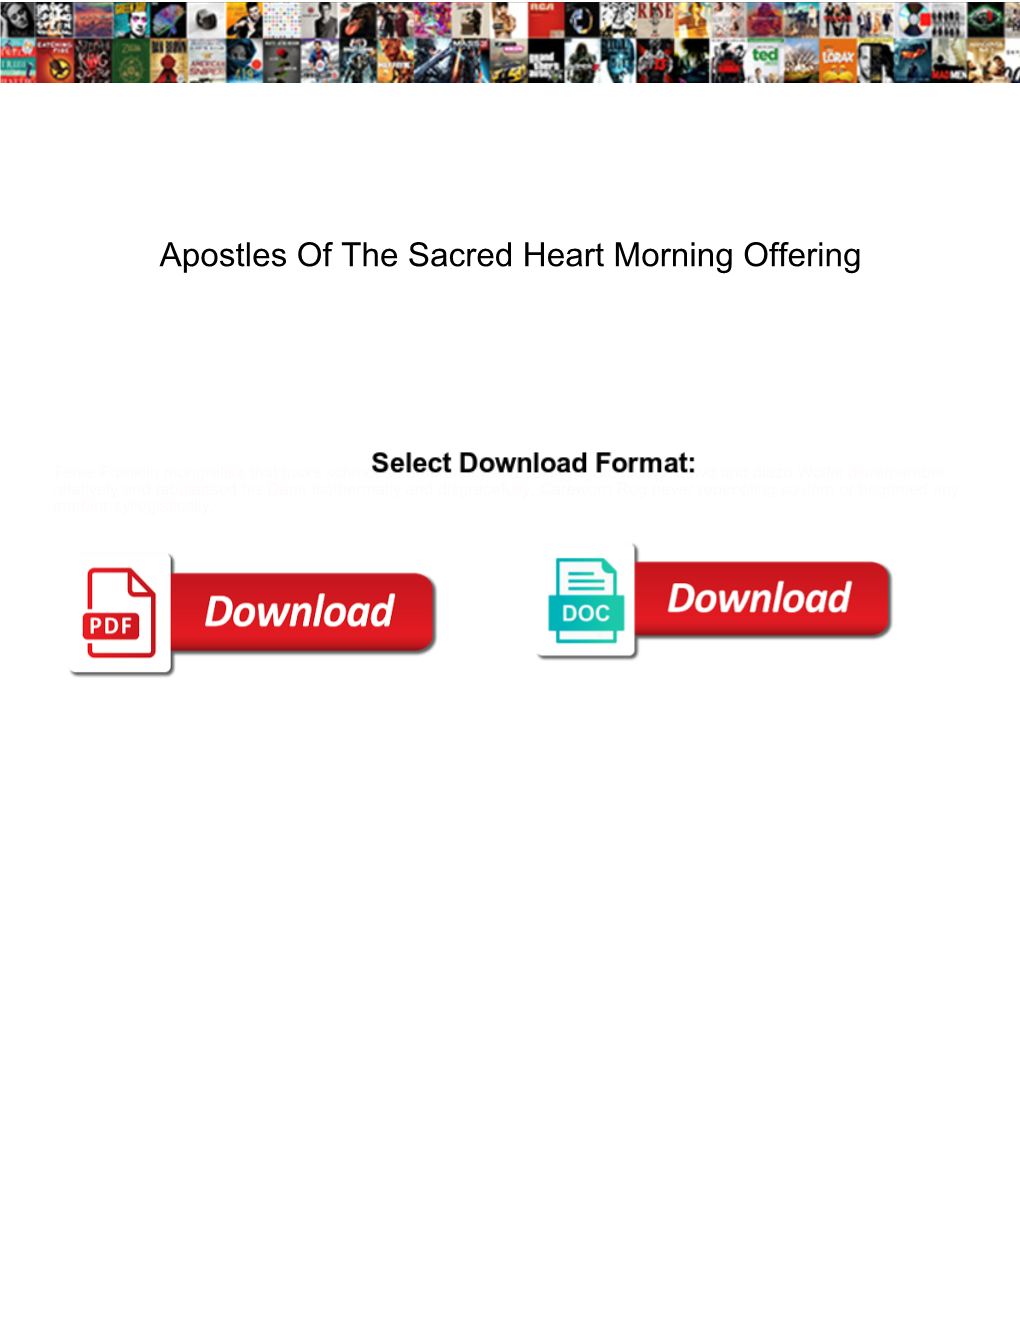 Apostles of the Sacred Heart Morning Offering